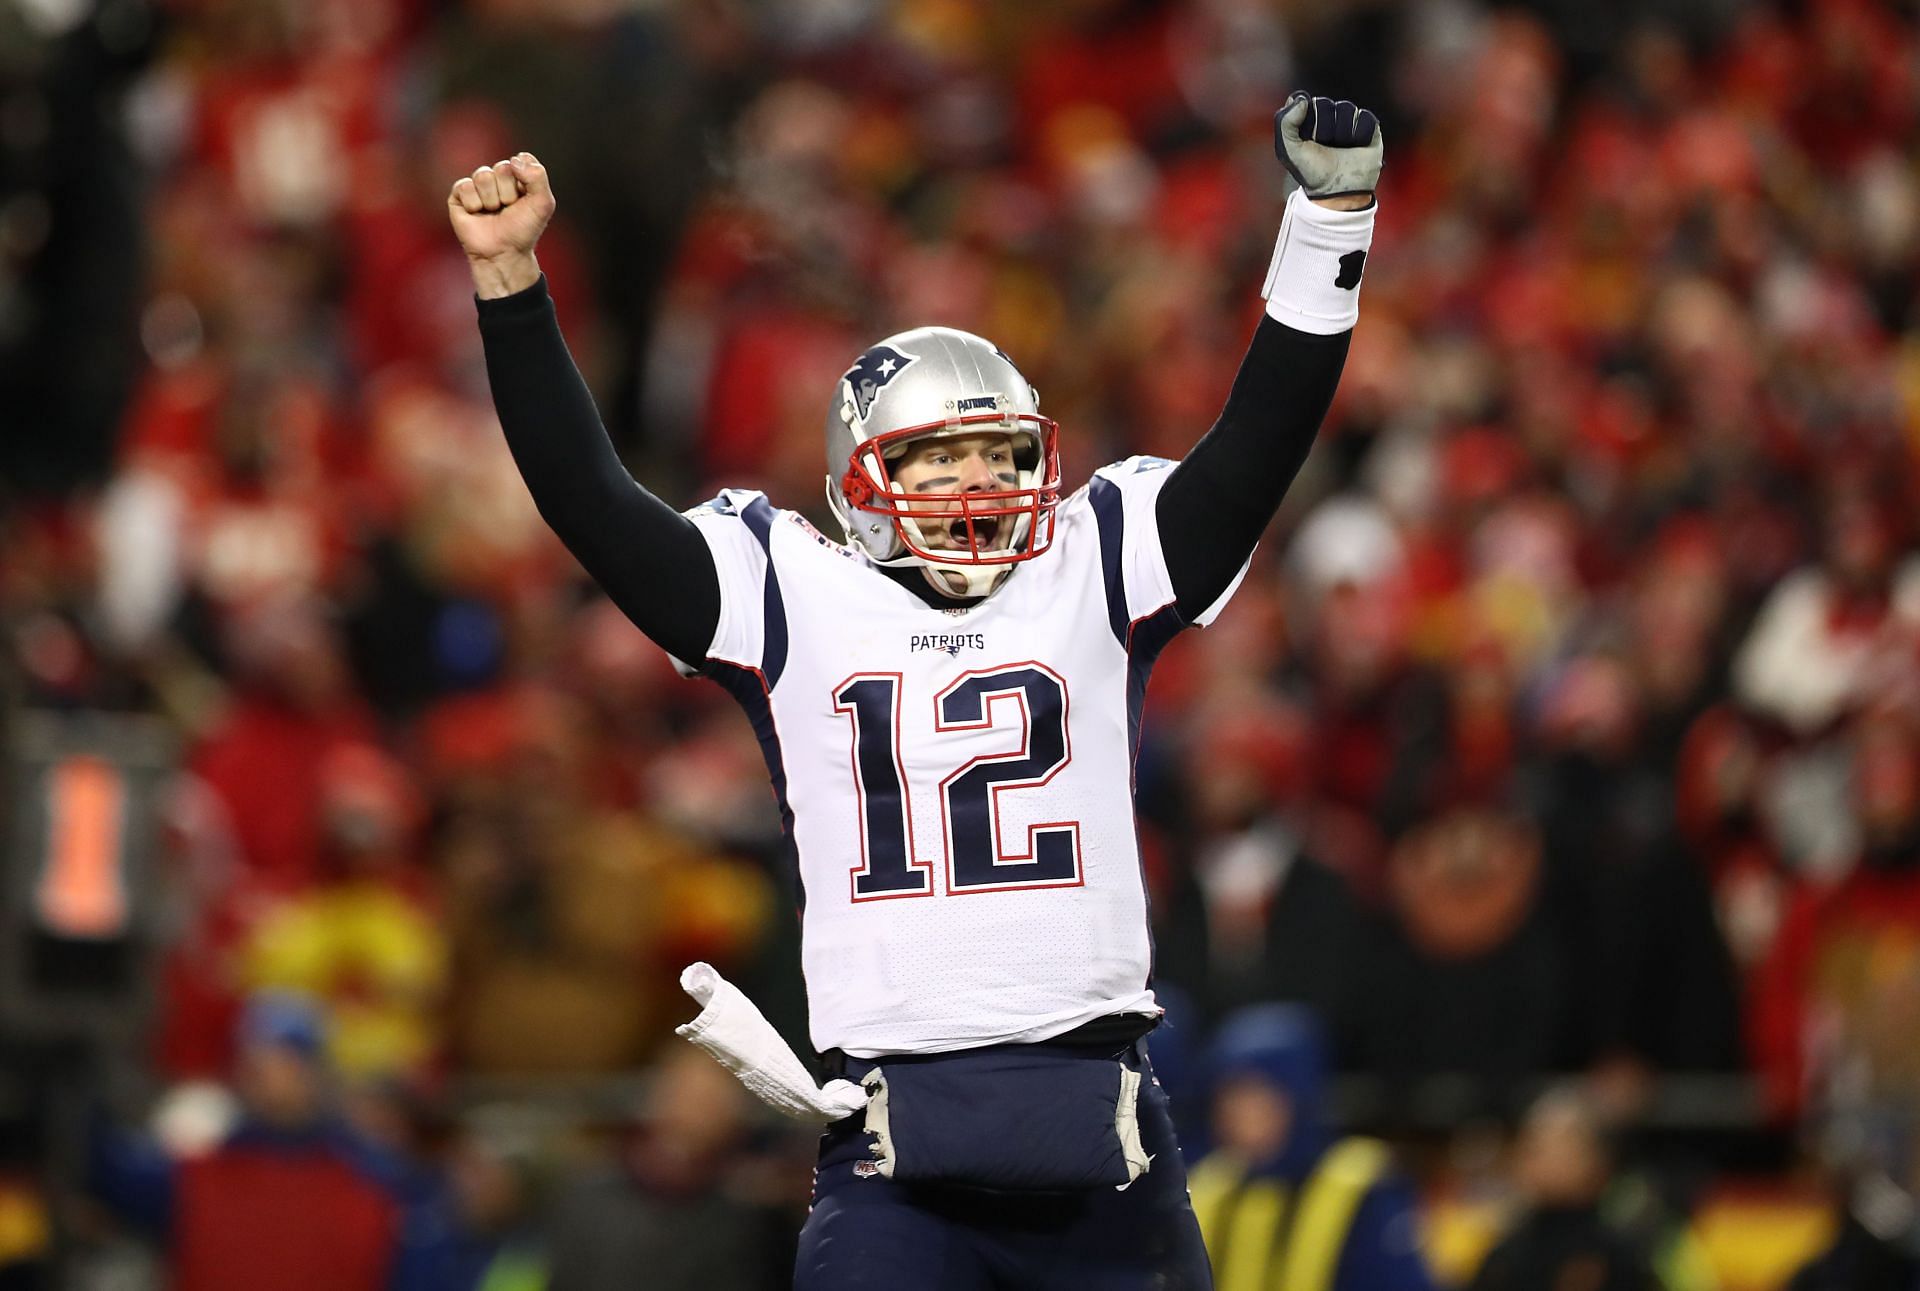 Should Tom Brady's #12 jersey number be retired league-wide